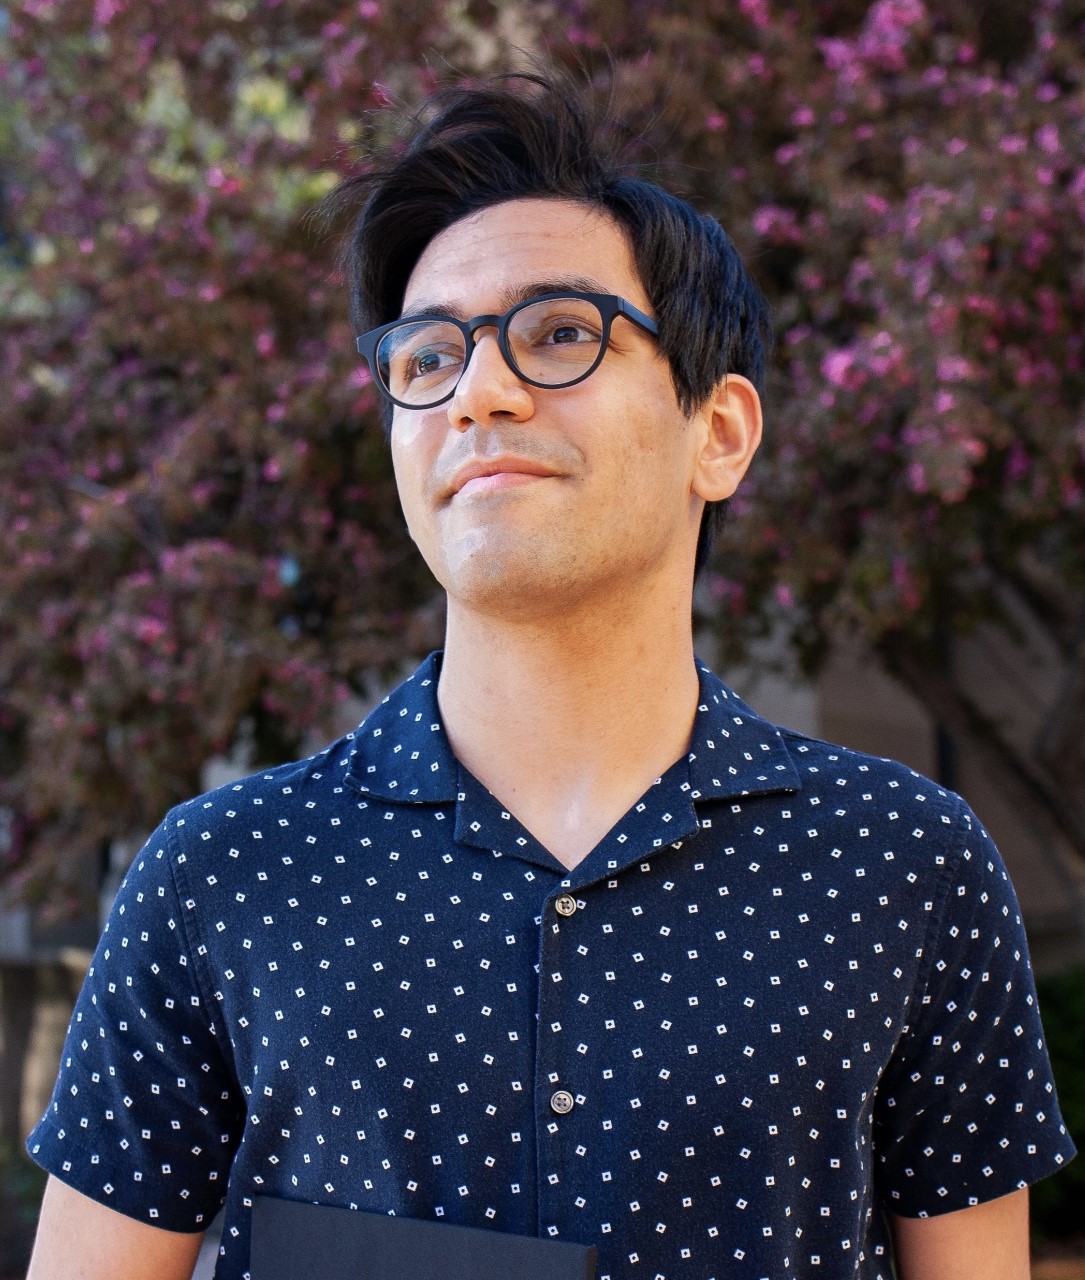 a young man wearing glasses and a blue shirt smiles while looking off-camera